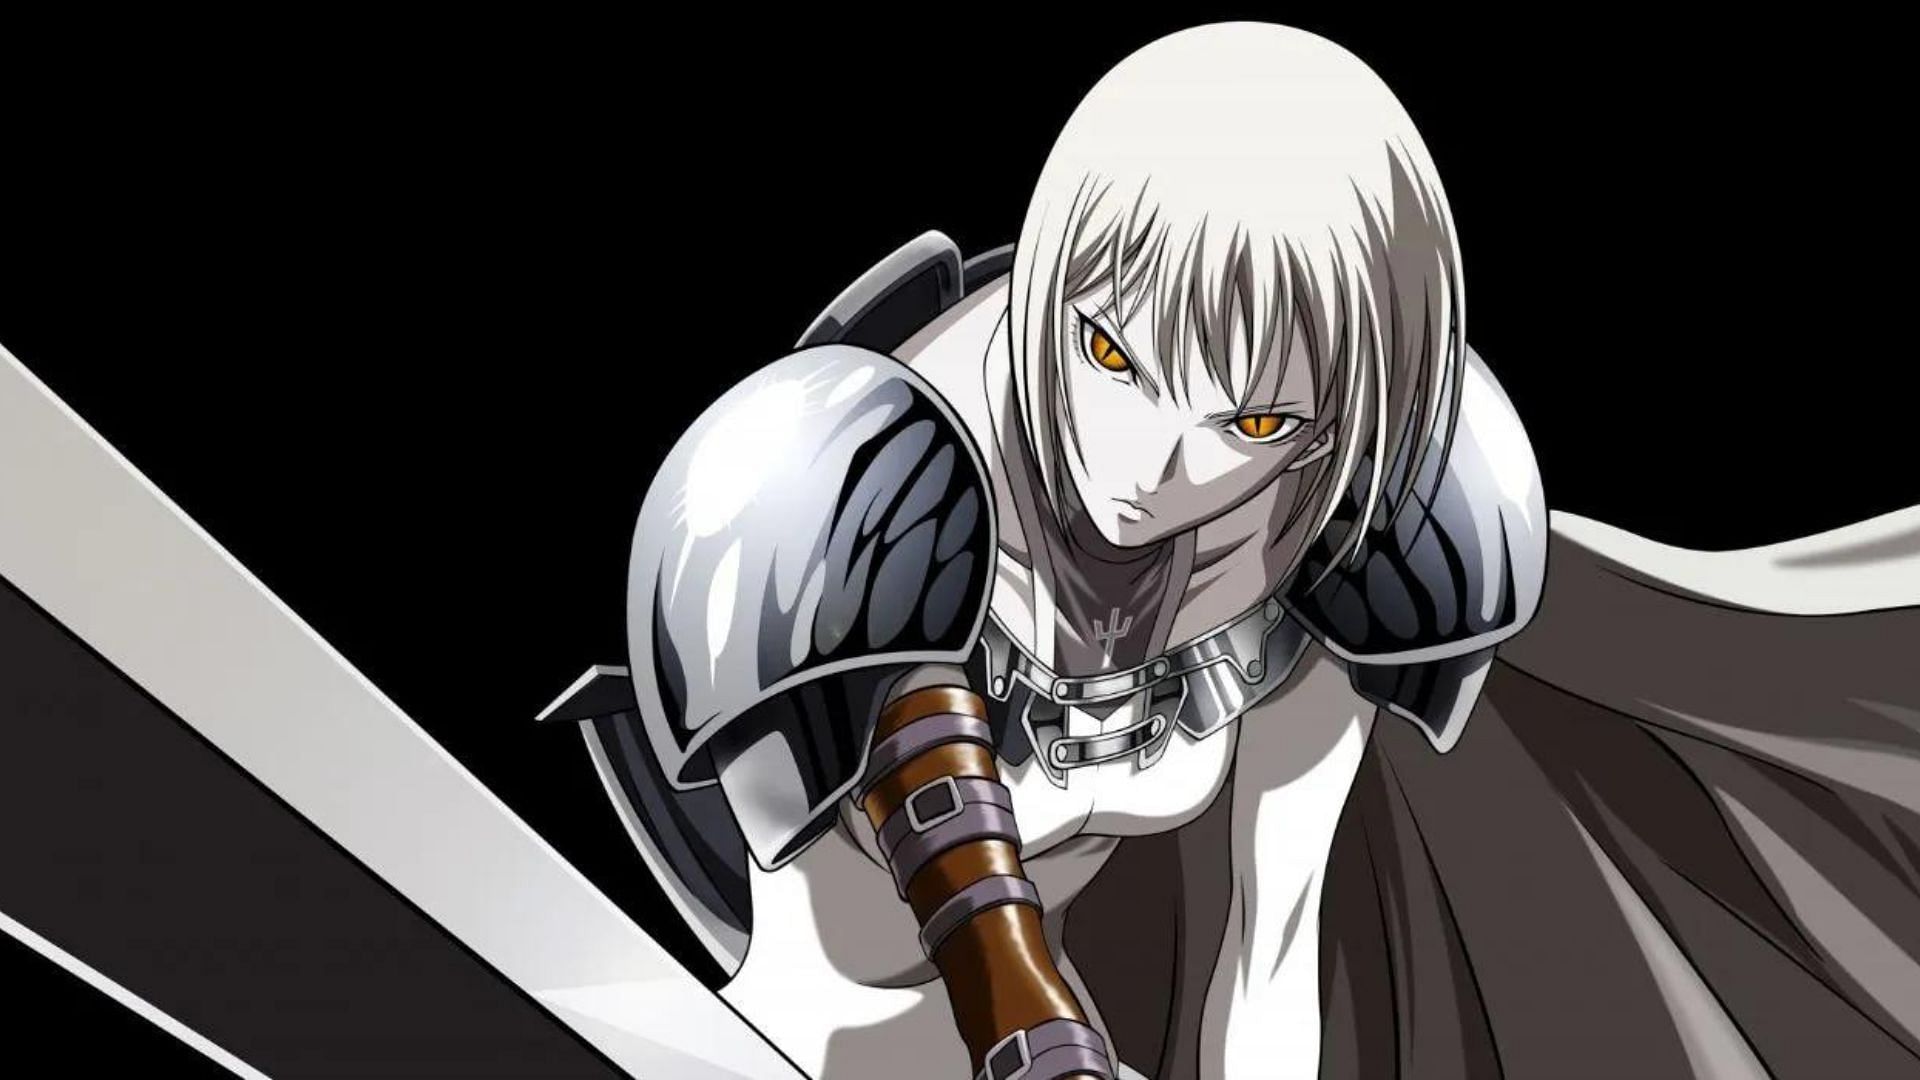 Petition · To get claymore the anime a reboot that follows the manga. ·  Change.org